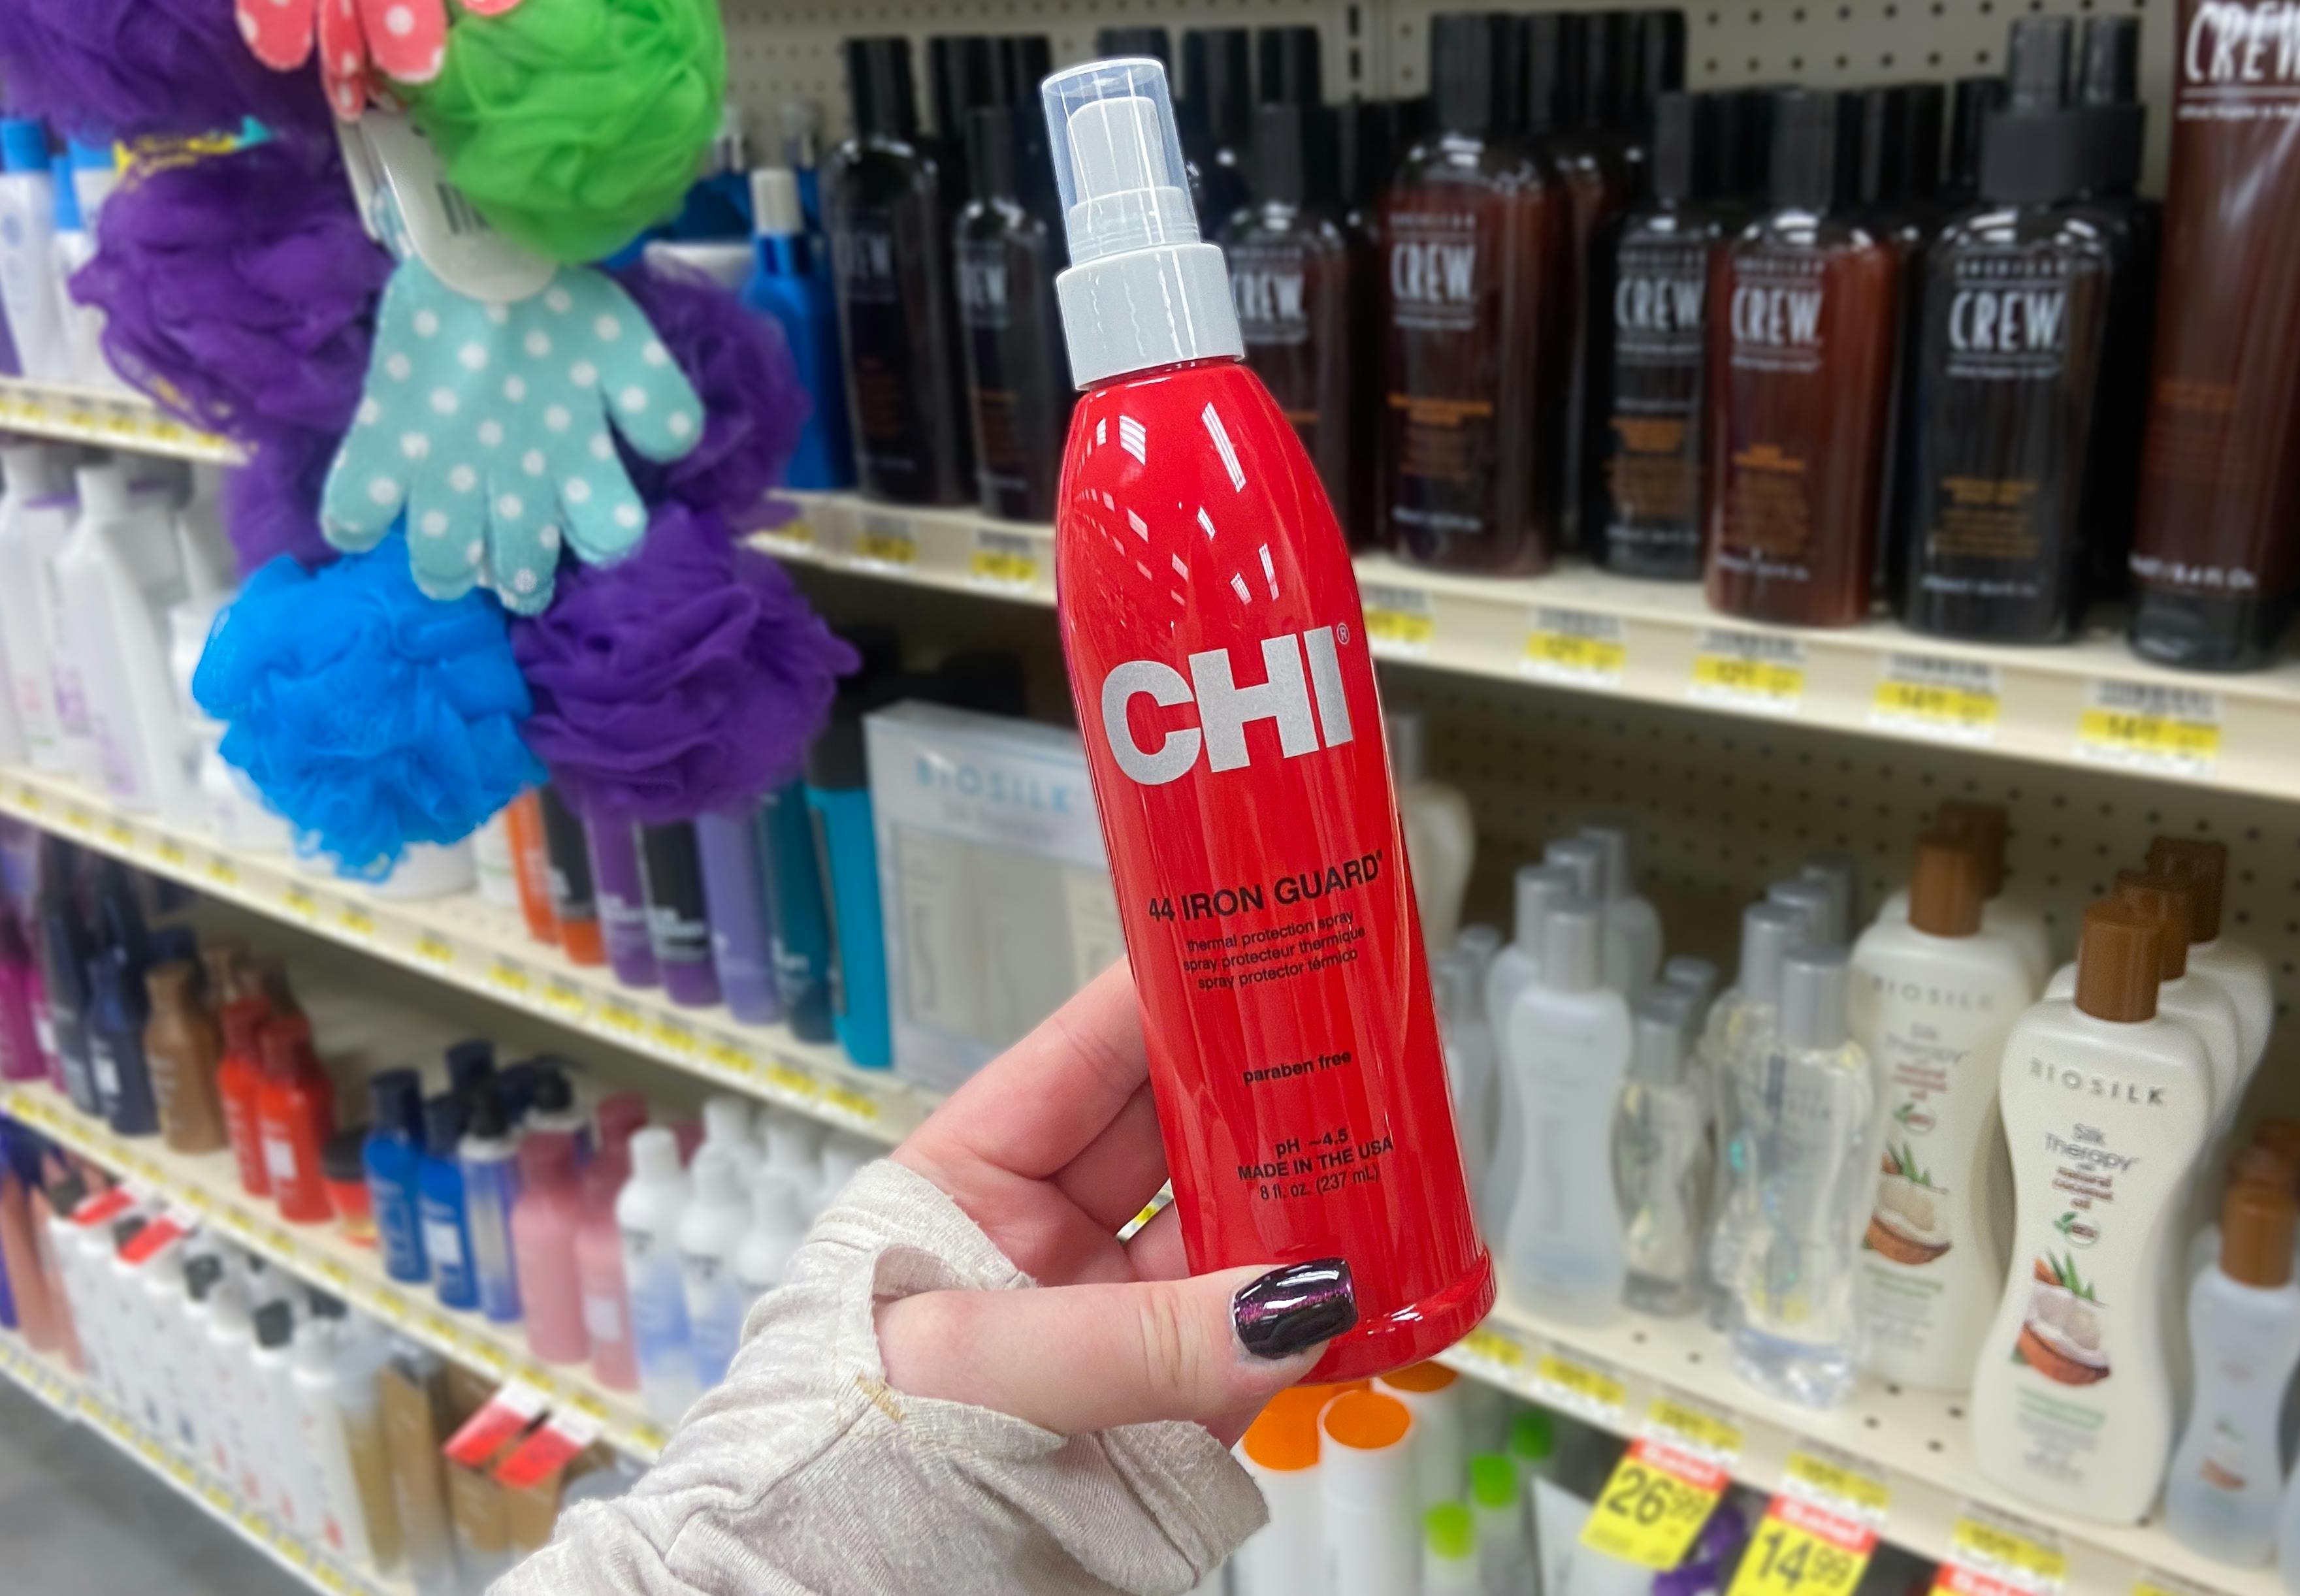 a hand holding a bottle of chi iron guard heat protectant hair spray in a store aisle